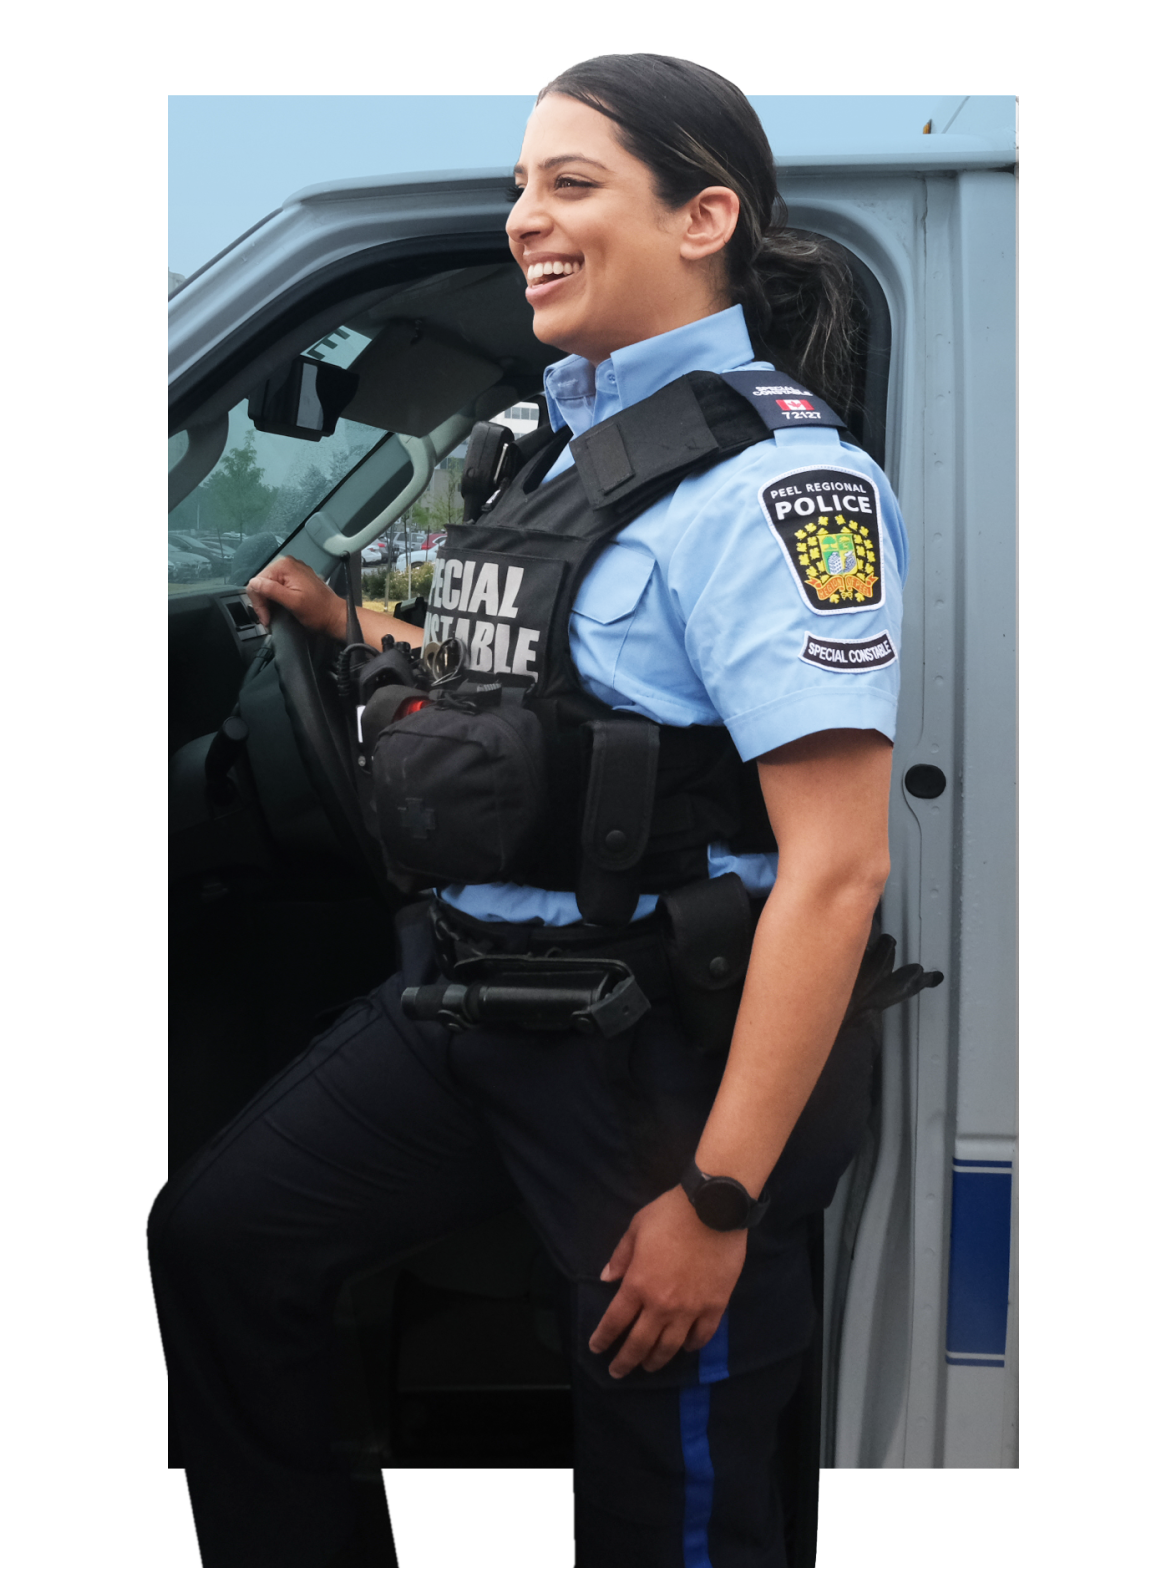 Female Peel Regional Police Officer member smiling while exiting her vehicle 